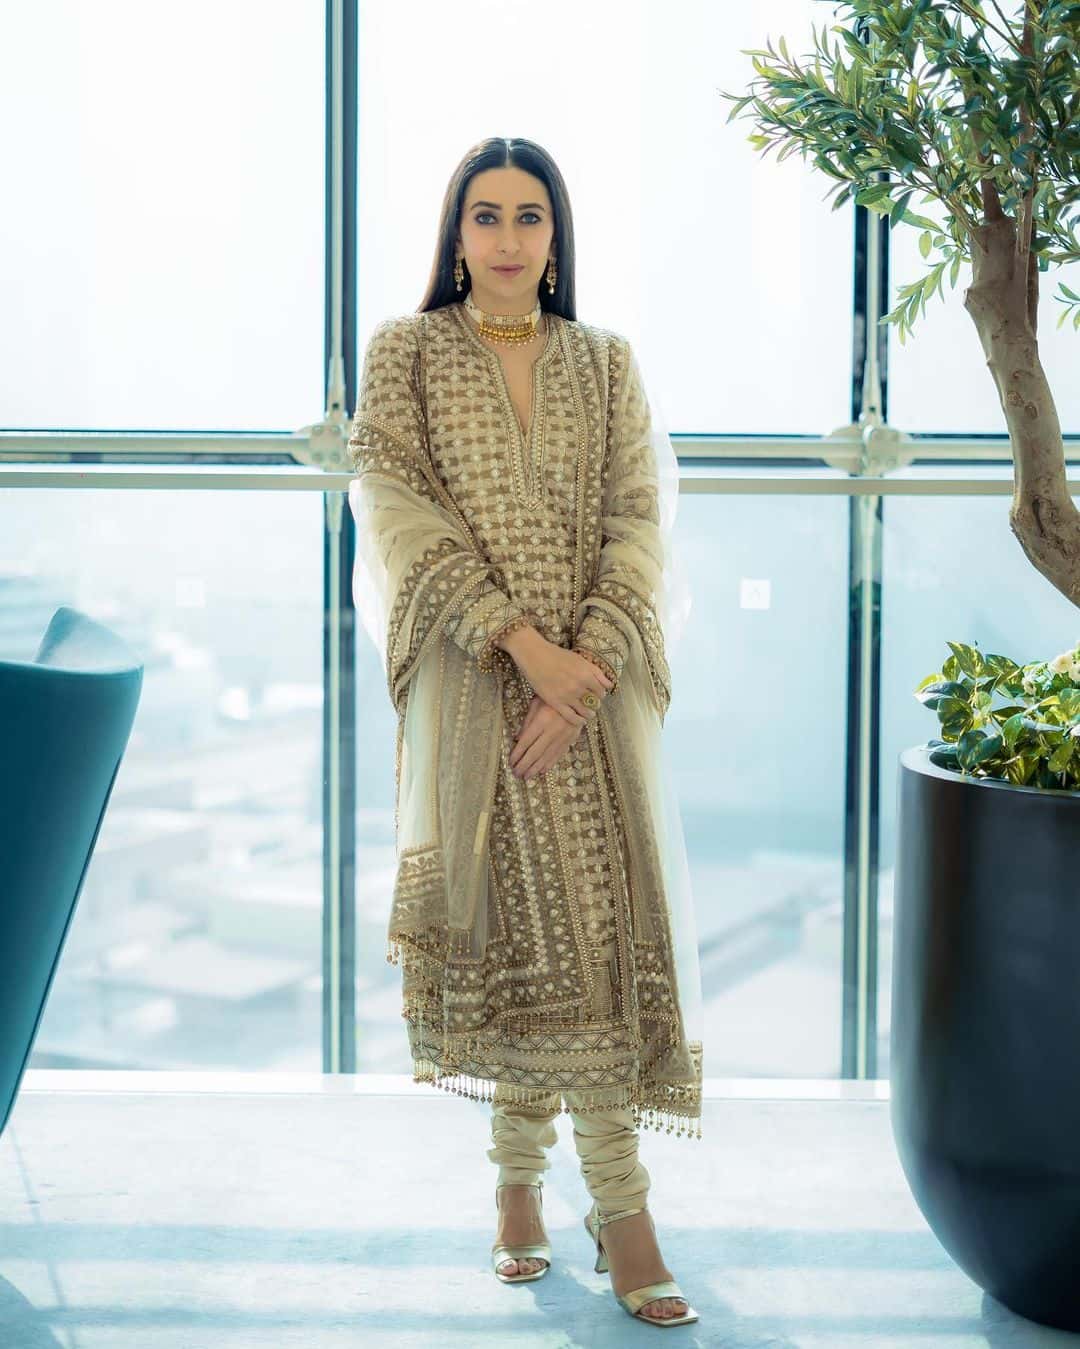 Karisma Kapoor is a true ethnic beauty in these outfits